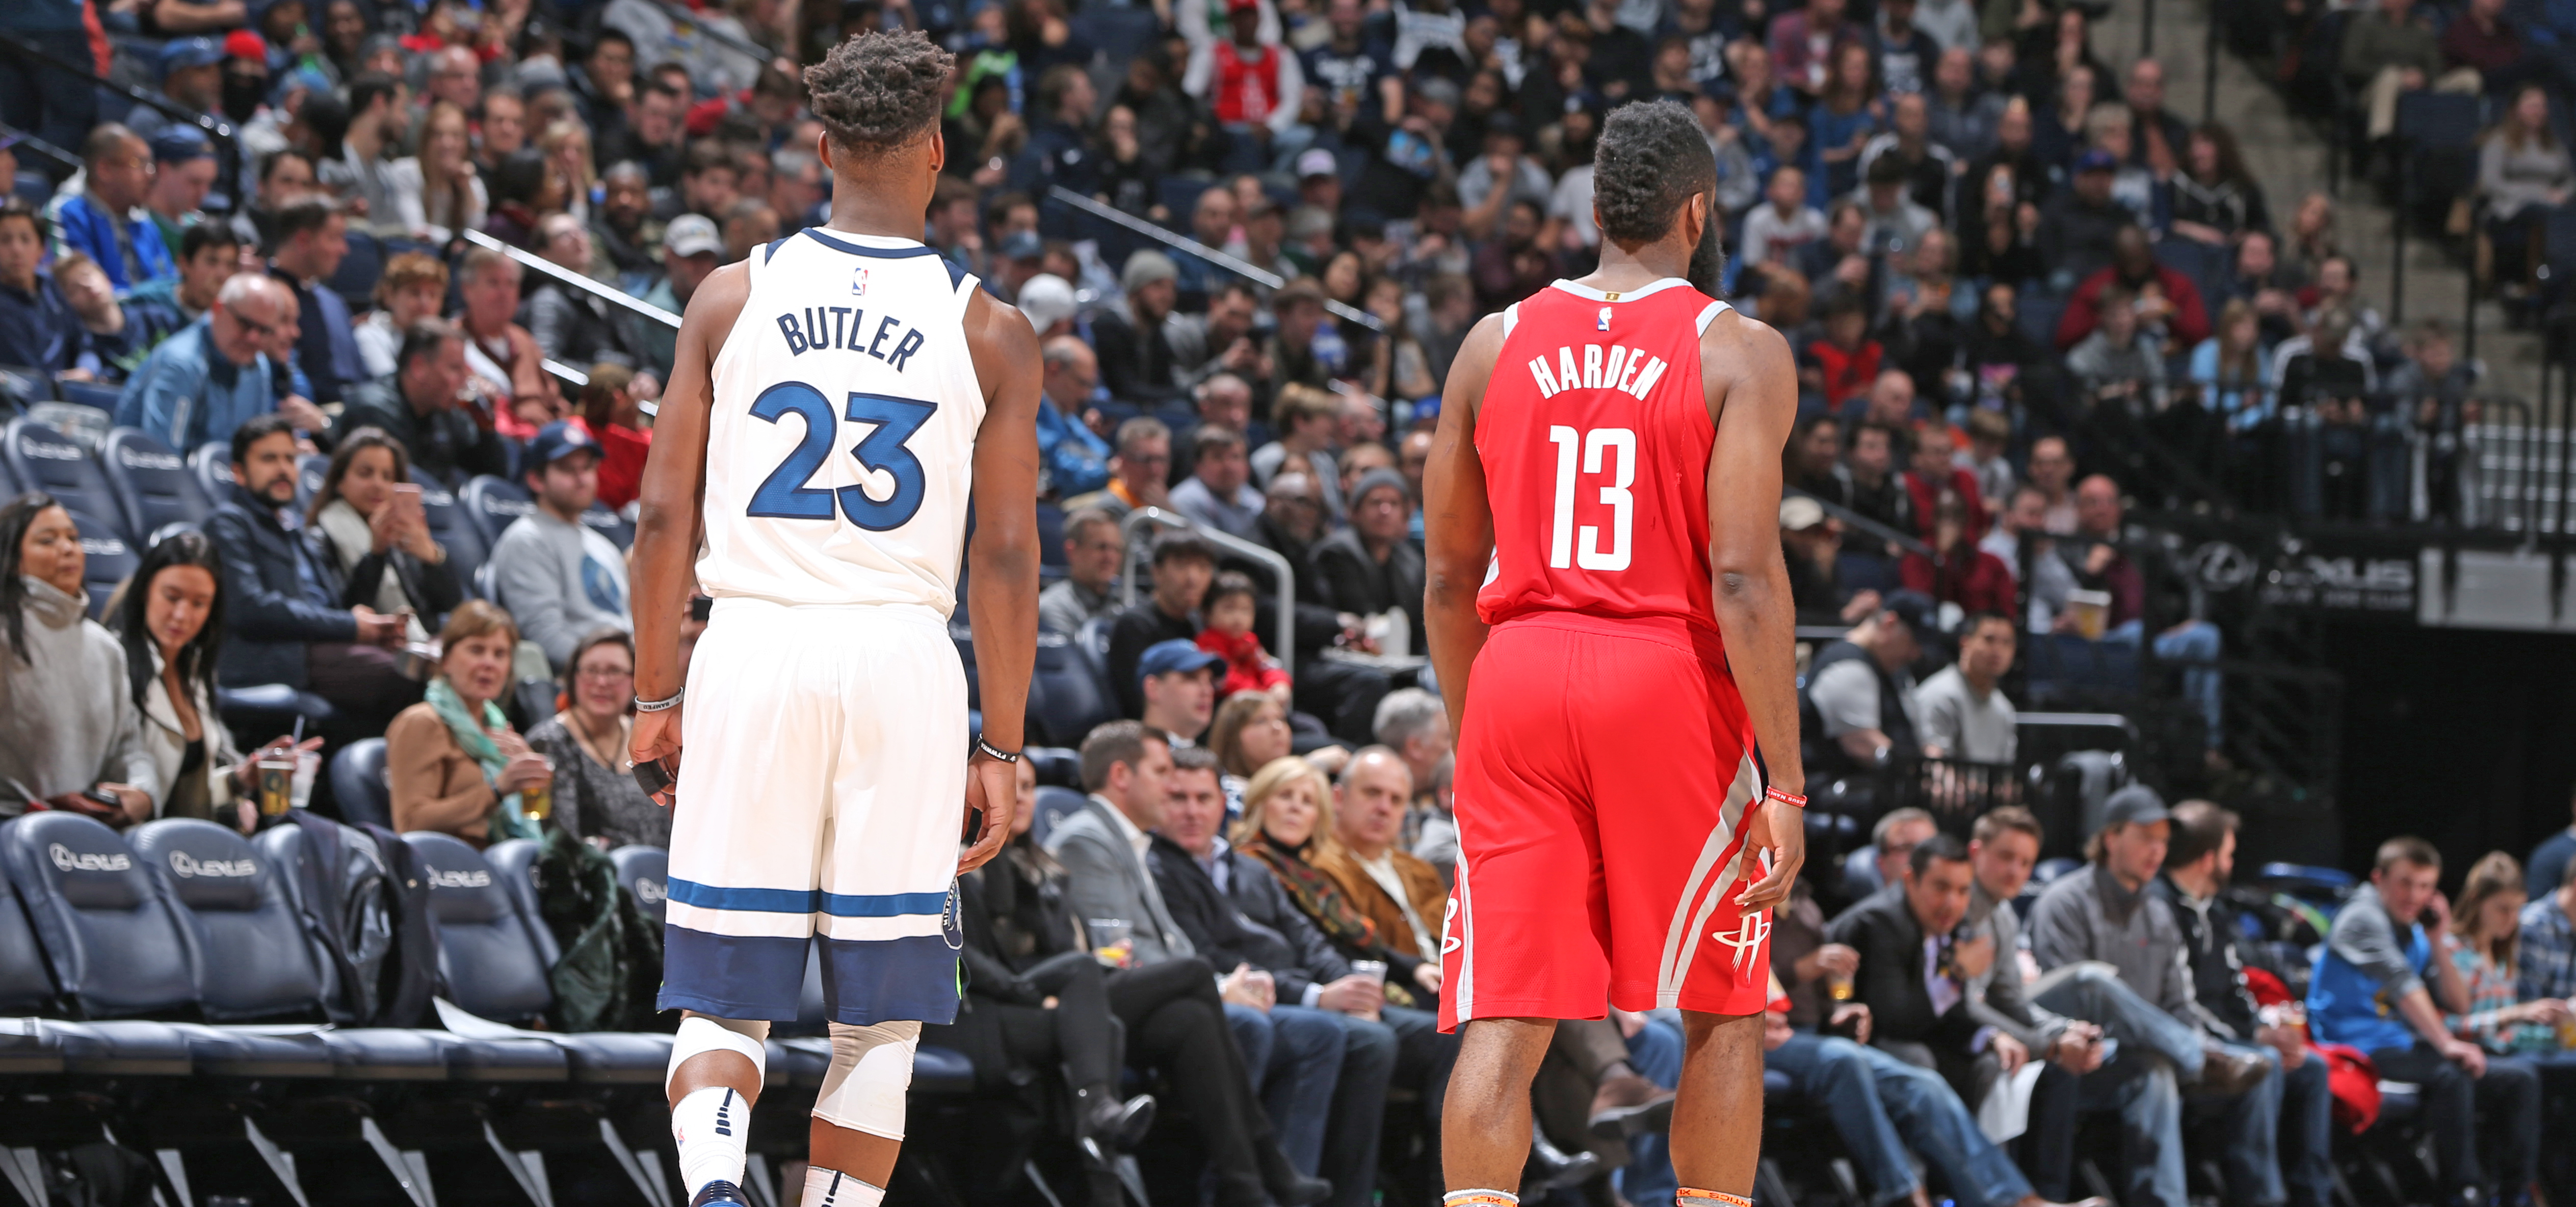 Scouting Report | Wolves at Rockets | Minnesota Timberwolves